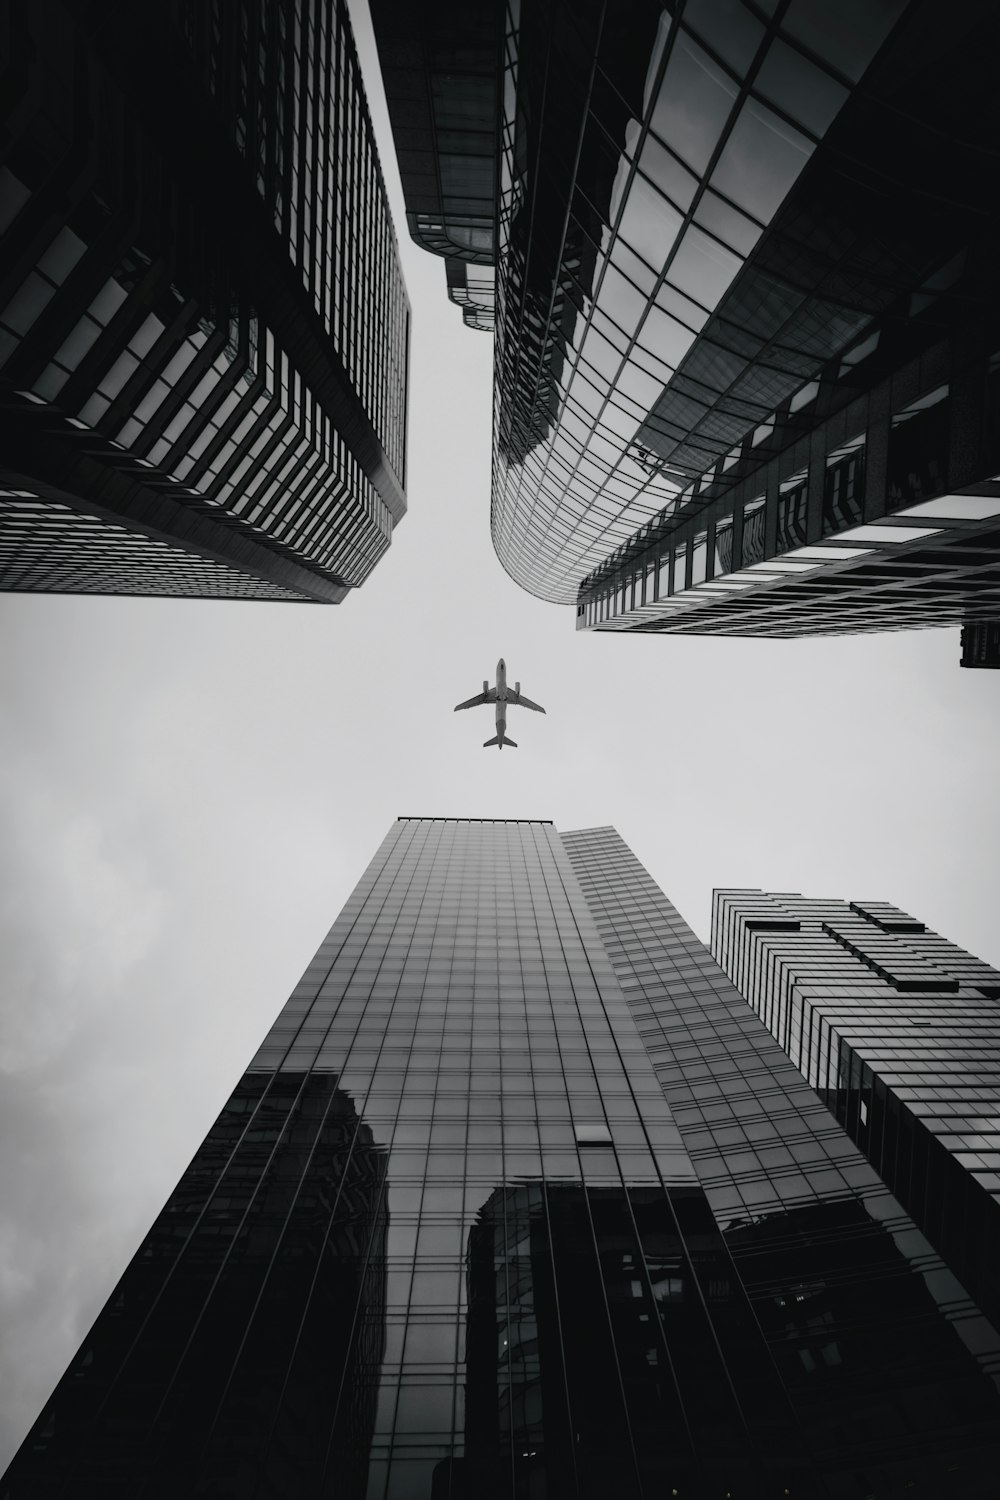 airplane flying over the high rise buildings during daytime